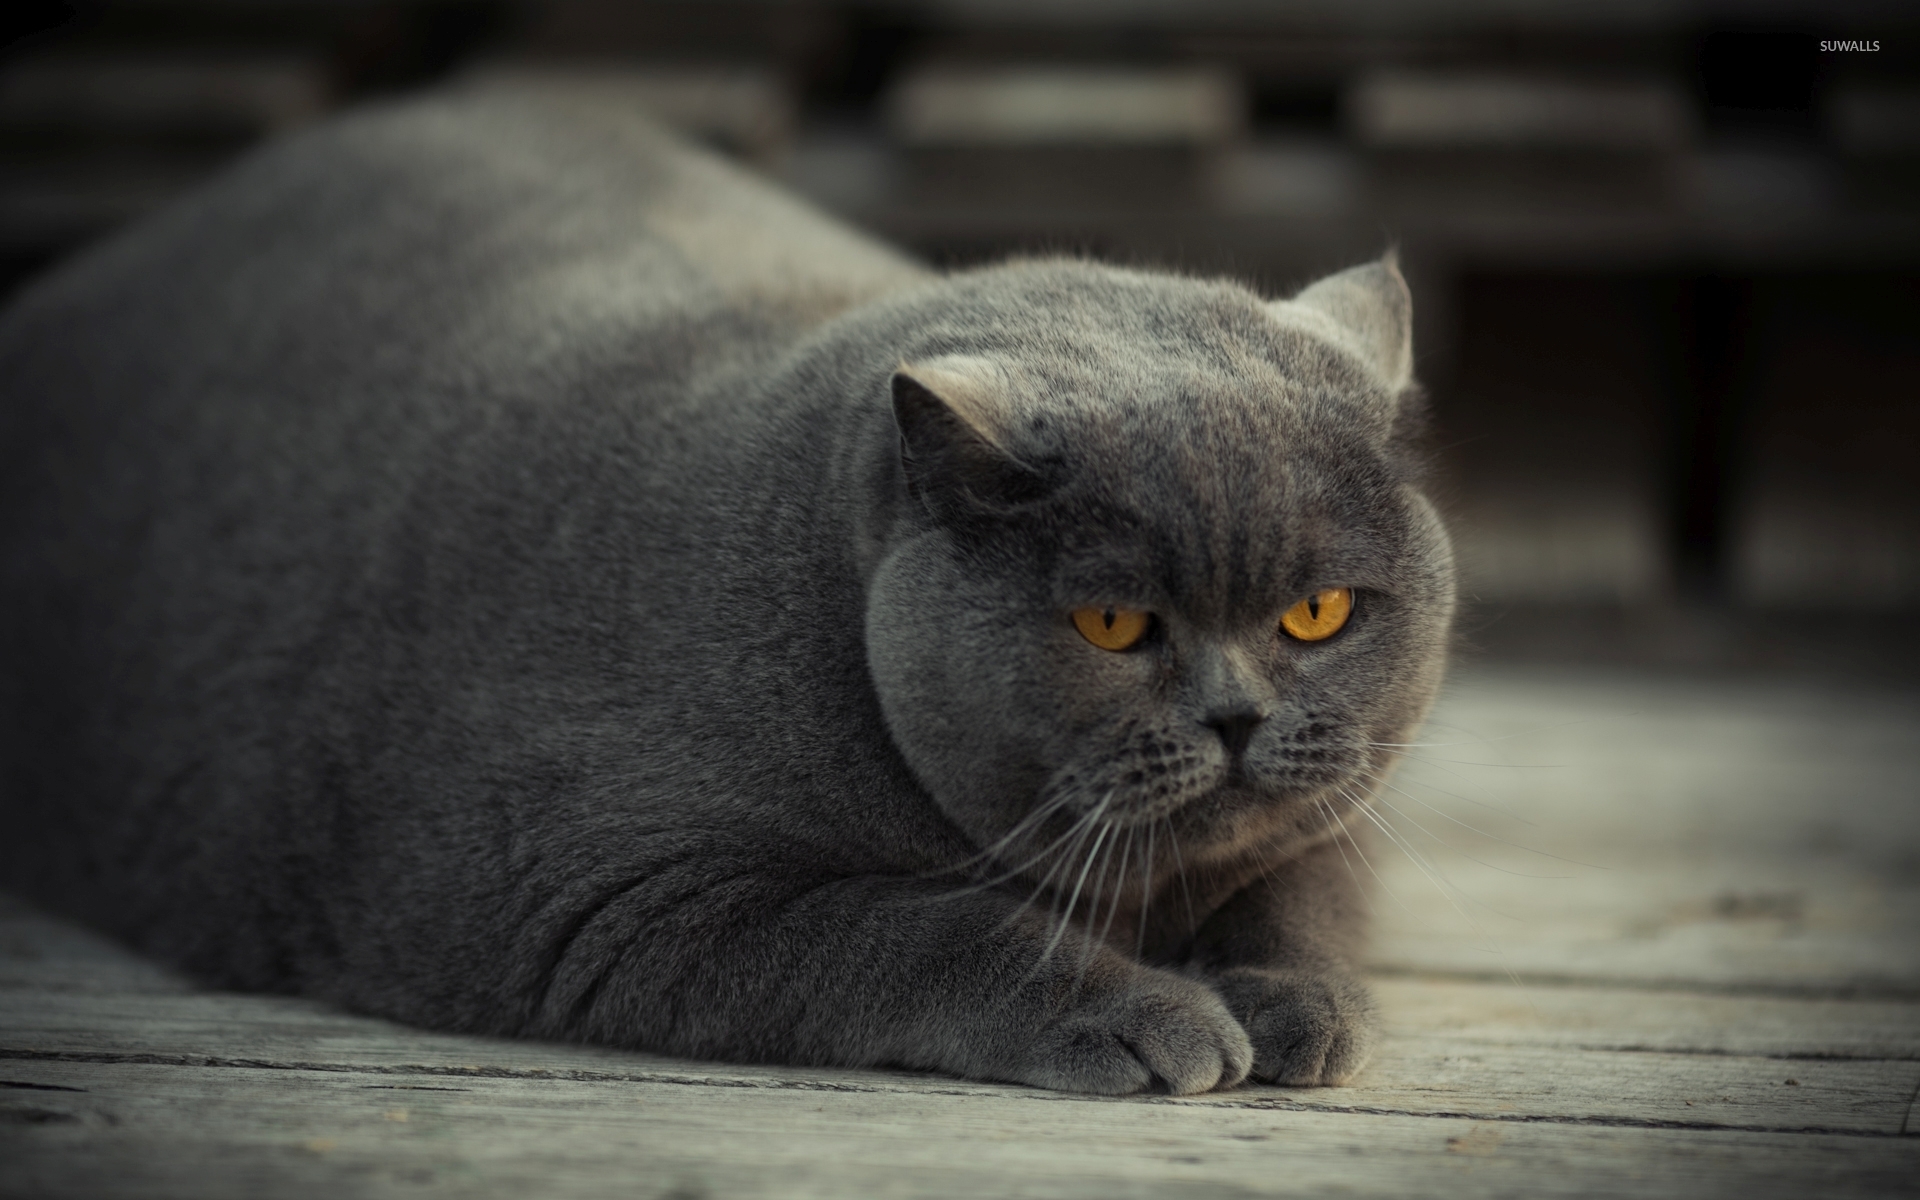 Gray fat cat with yellow eyes wallpaper 1920x1080. 